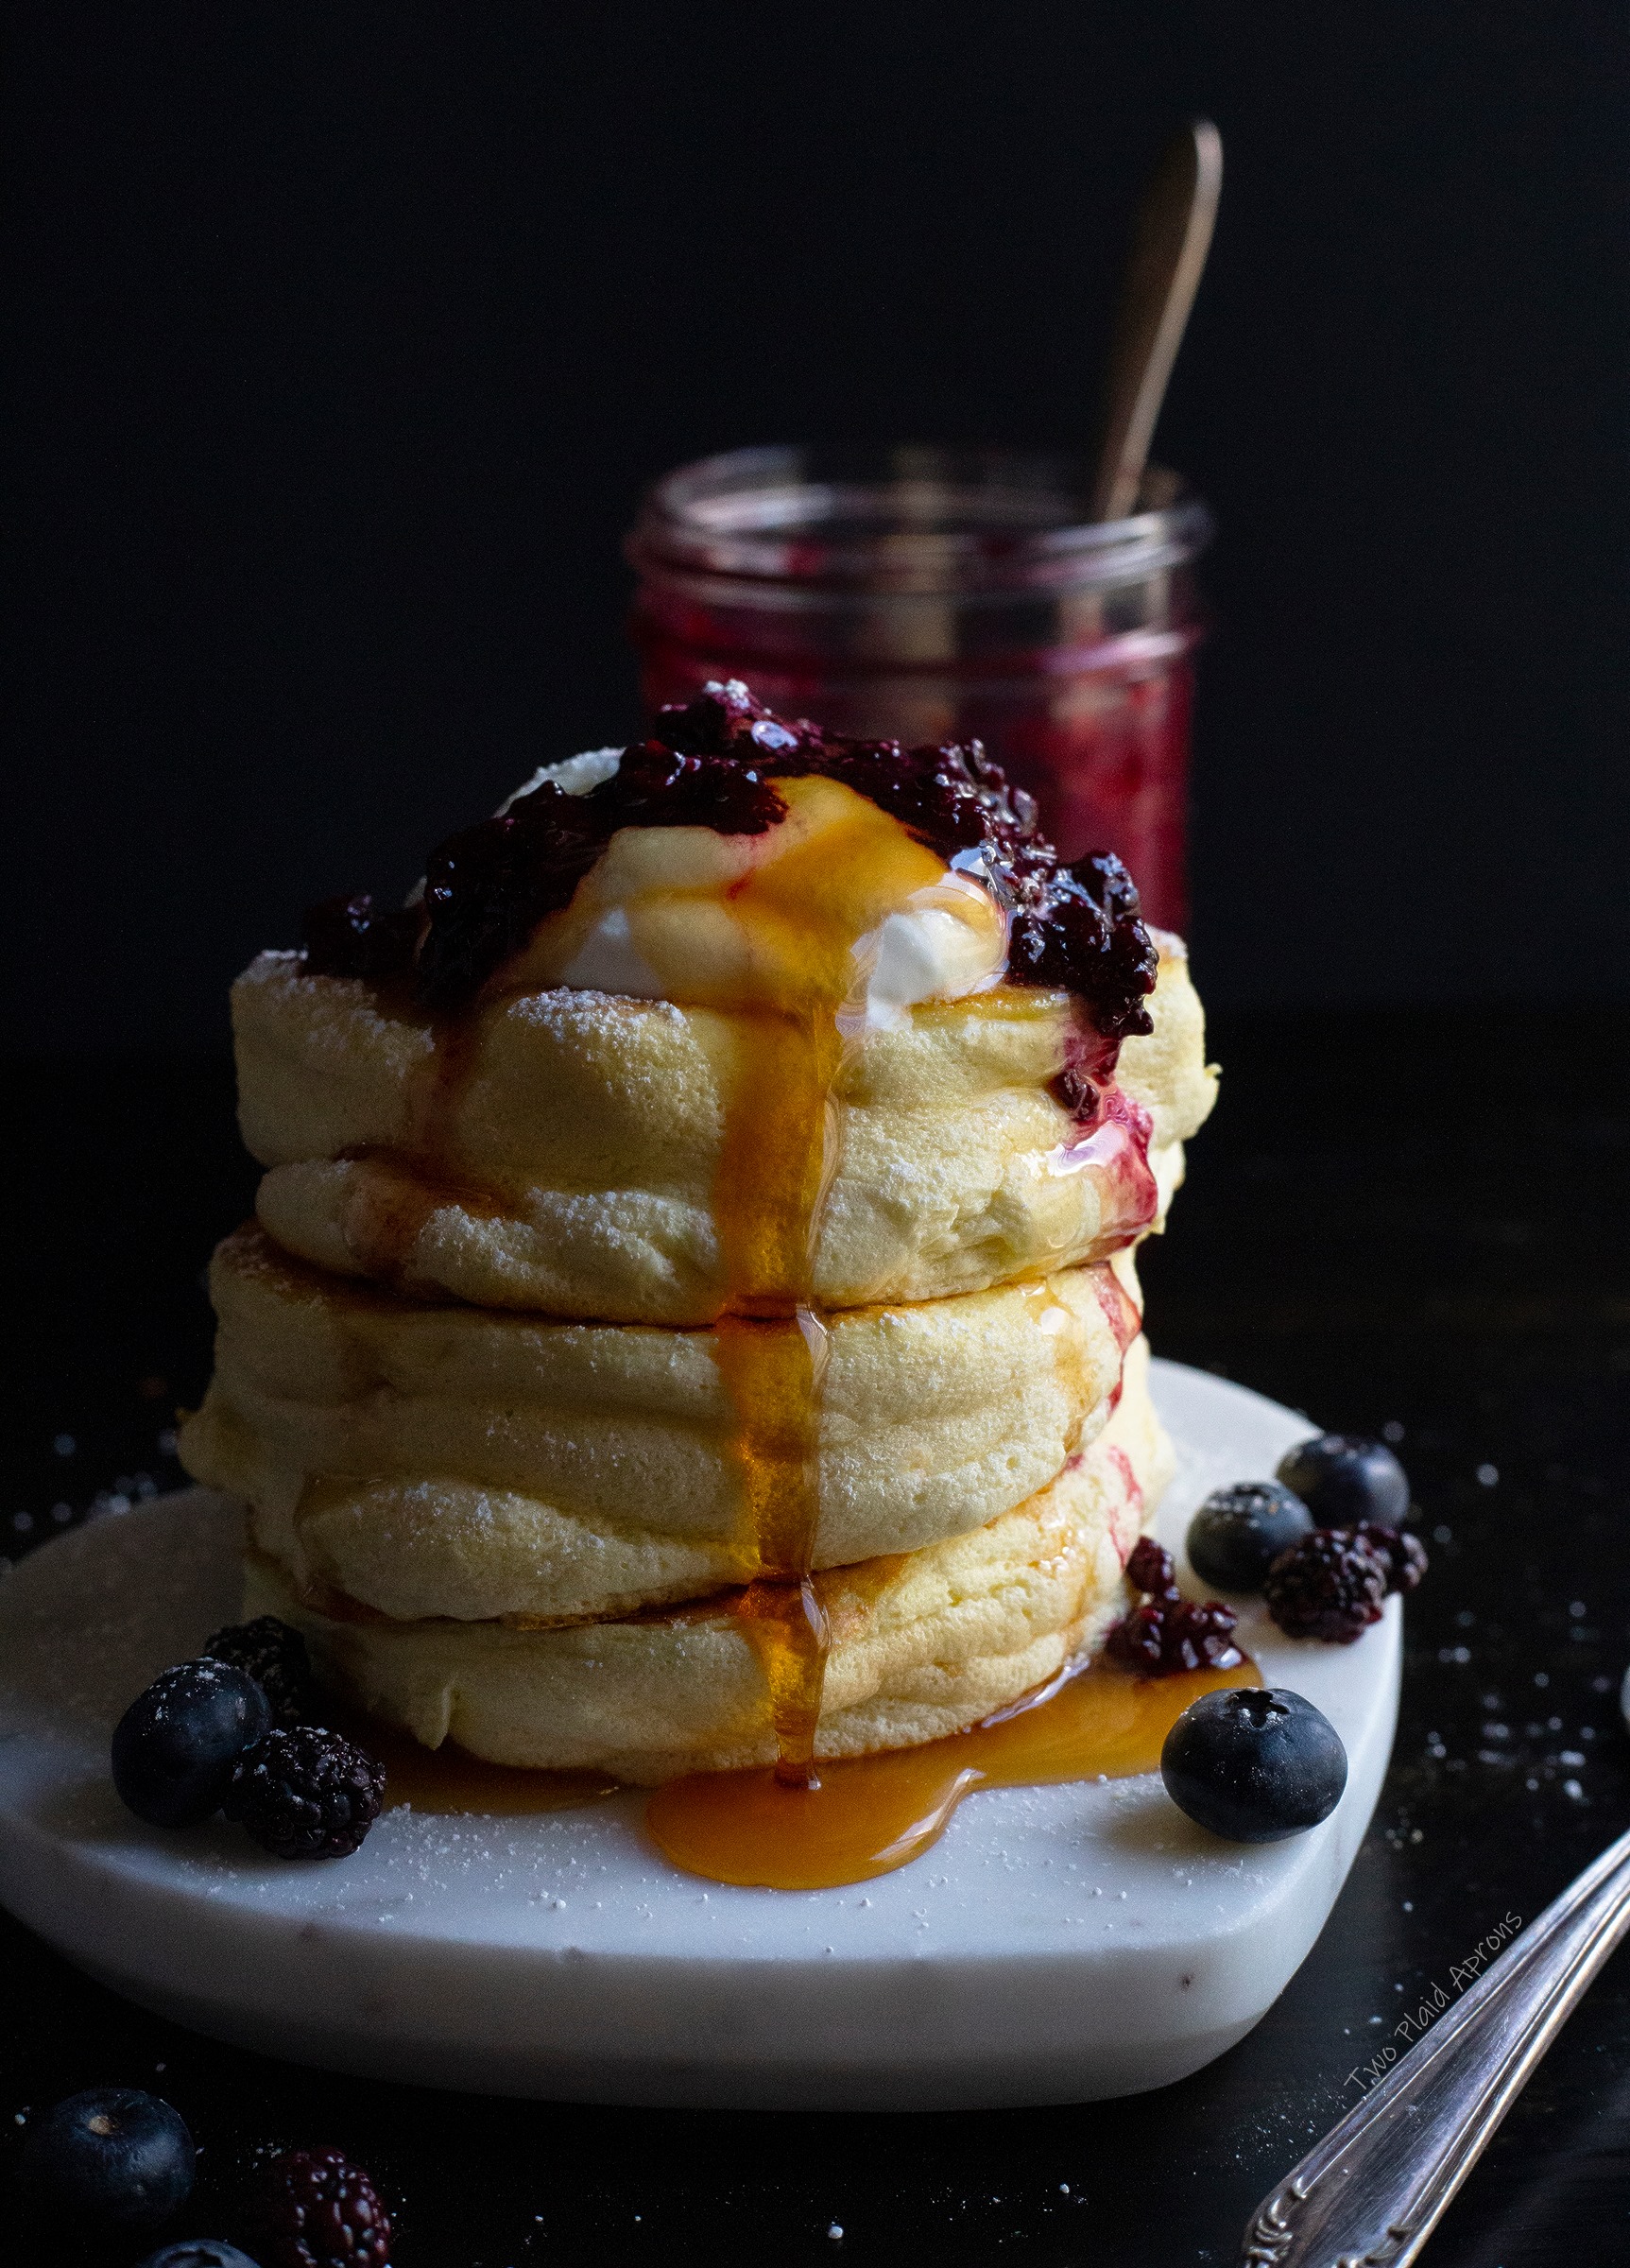 Our jiggly Japanese soufflé pancakes topped with whipped cream, blackberry compote, powdered sugar, and maple syrup.